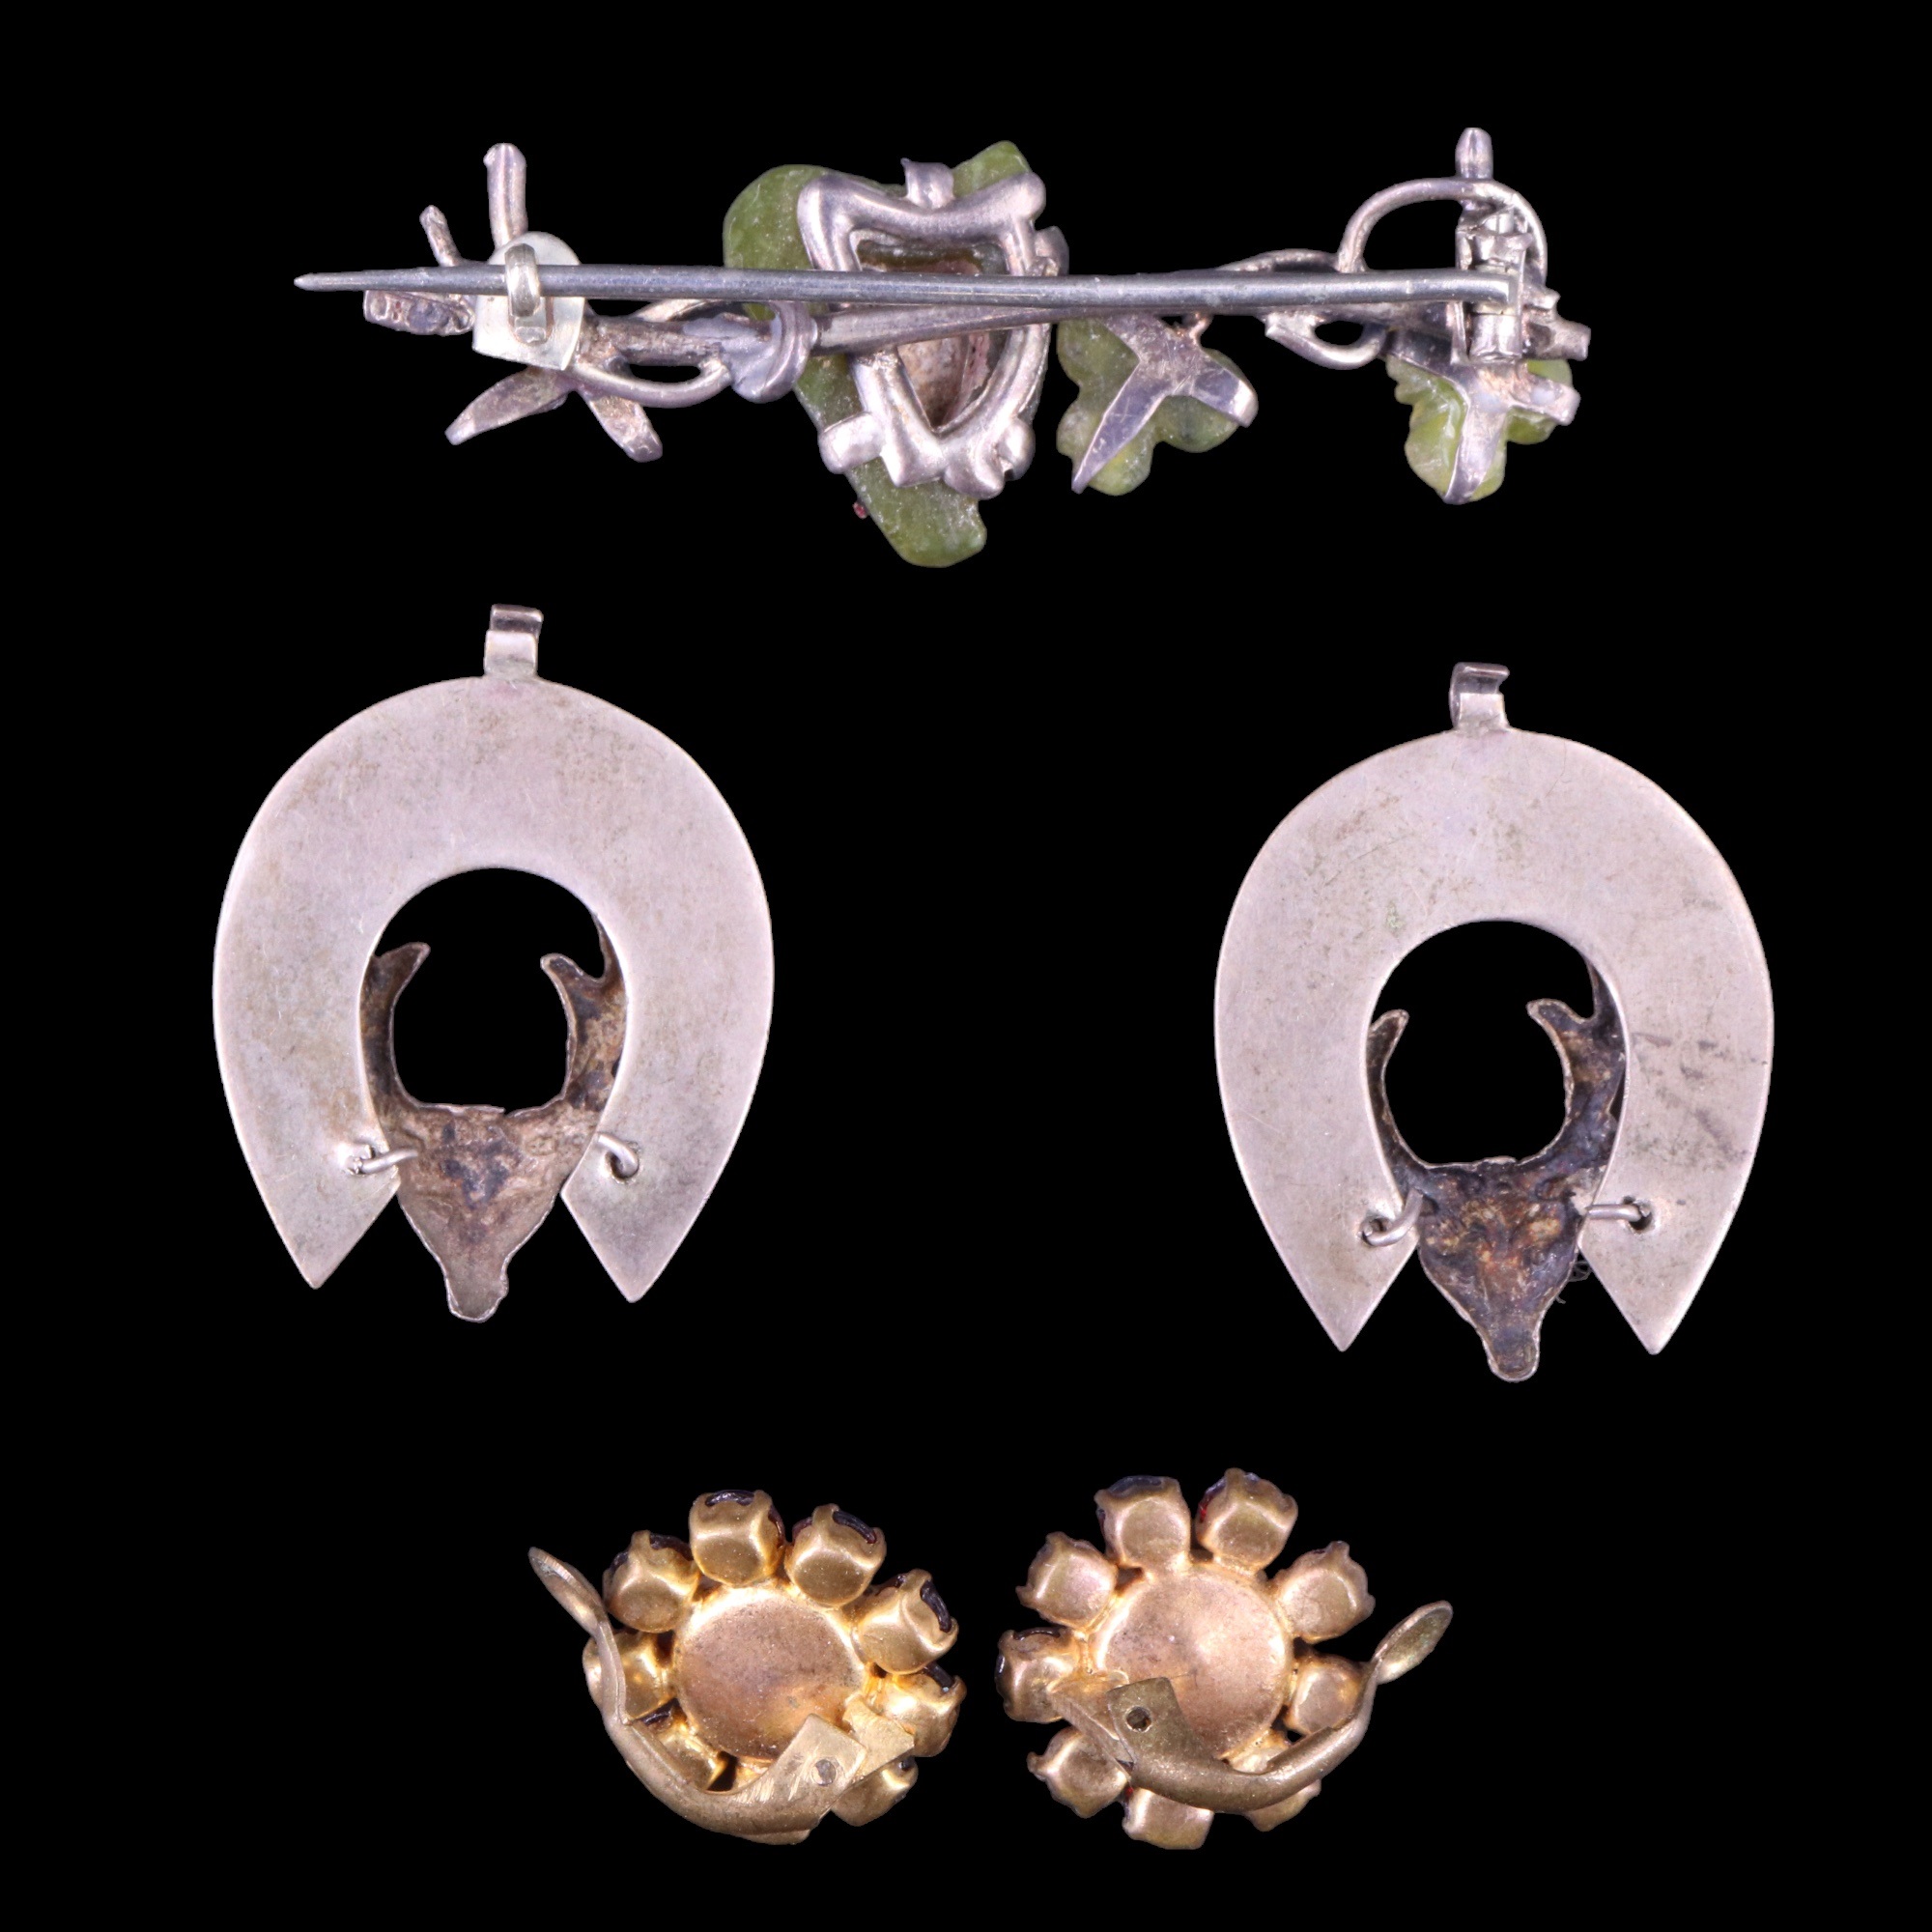 A pearlized Umbonium sea shell necklace together with two Scottish polished hardstone pendants or - Image 4 of 4